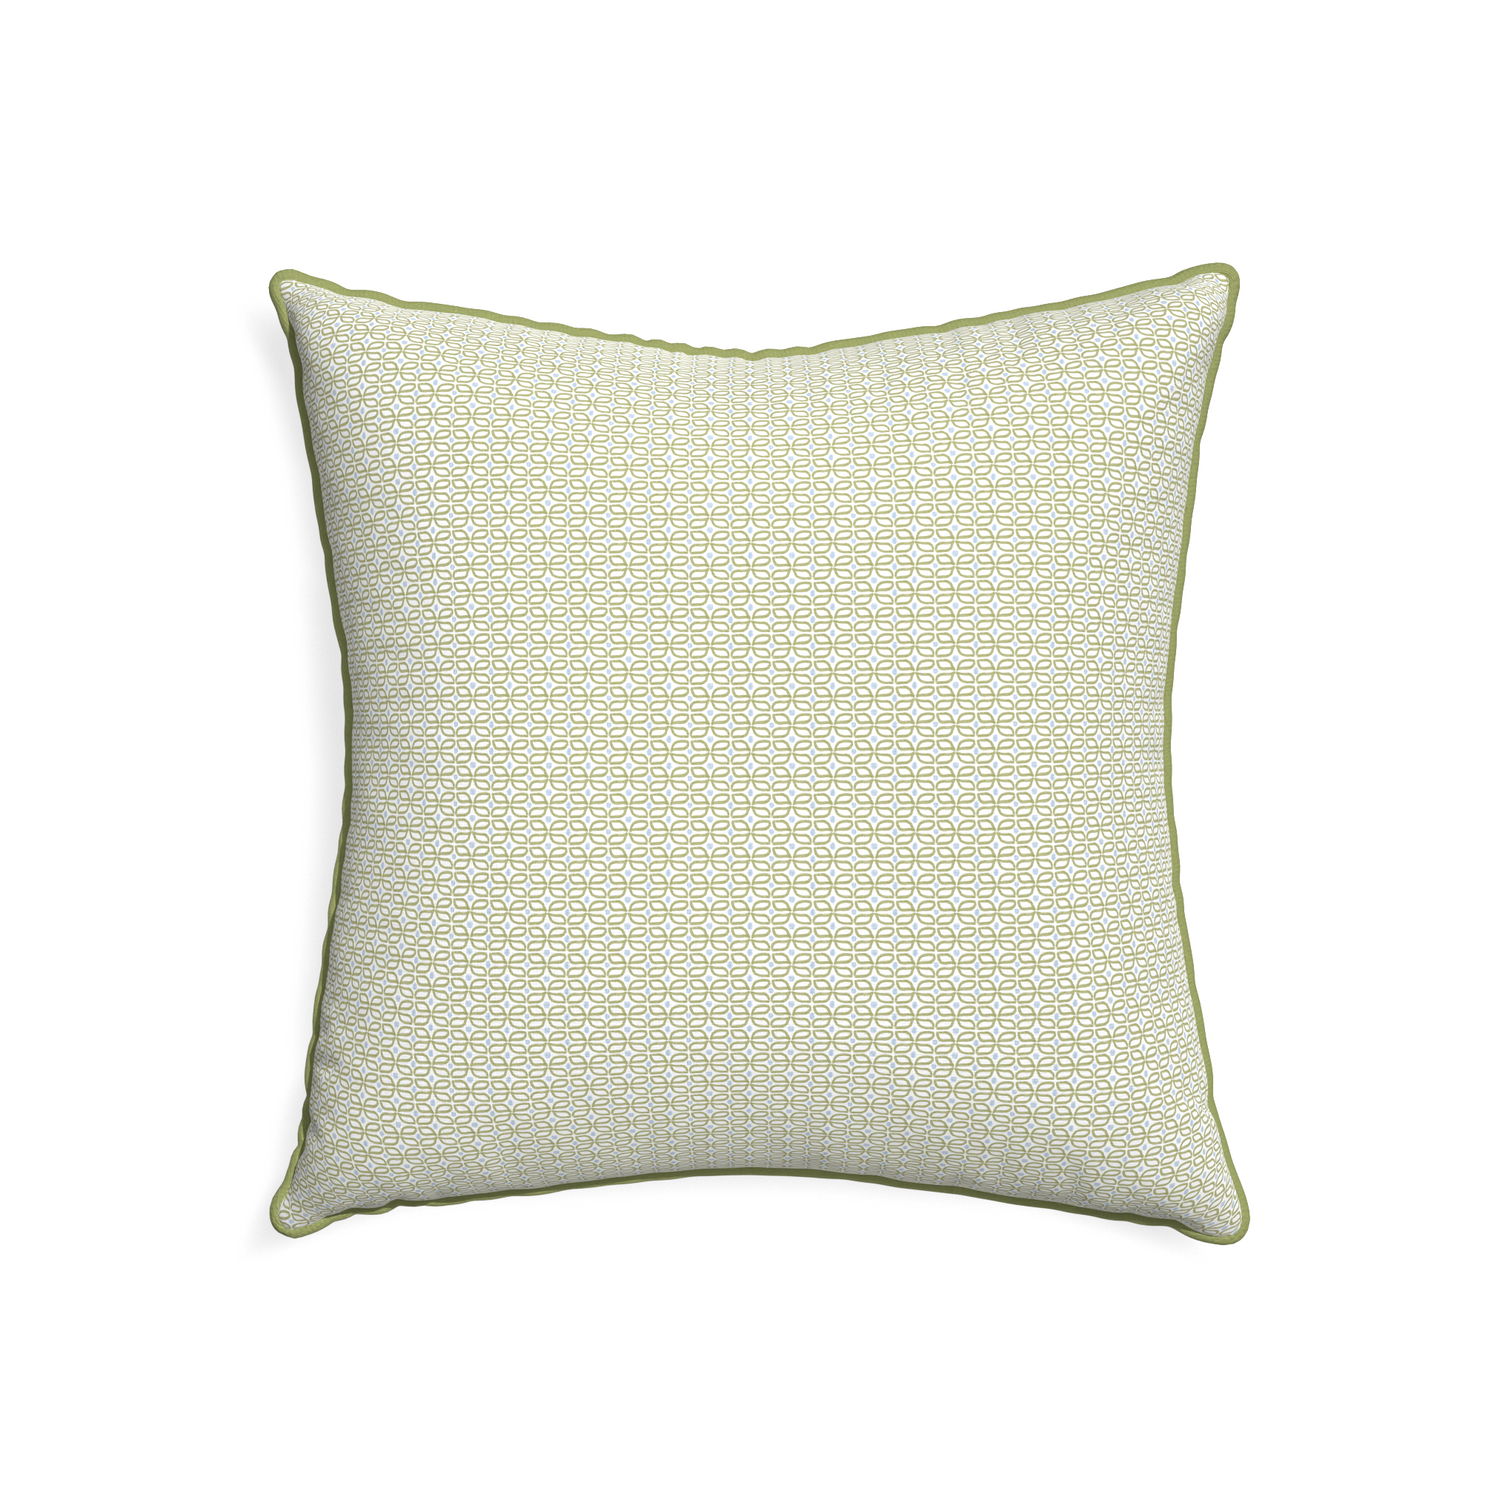 22-square loomi moss custom pillow with moss piping on white background